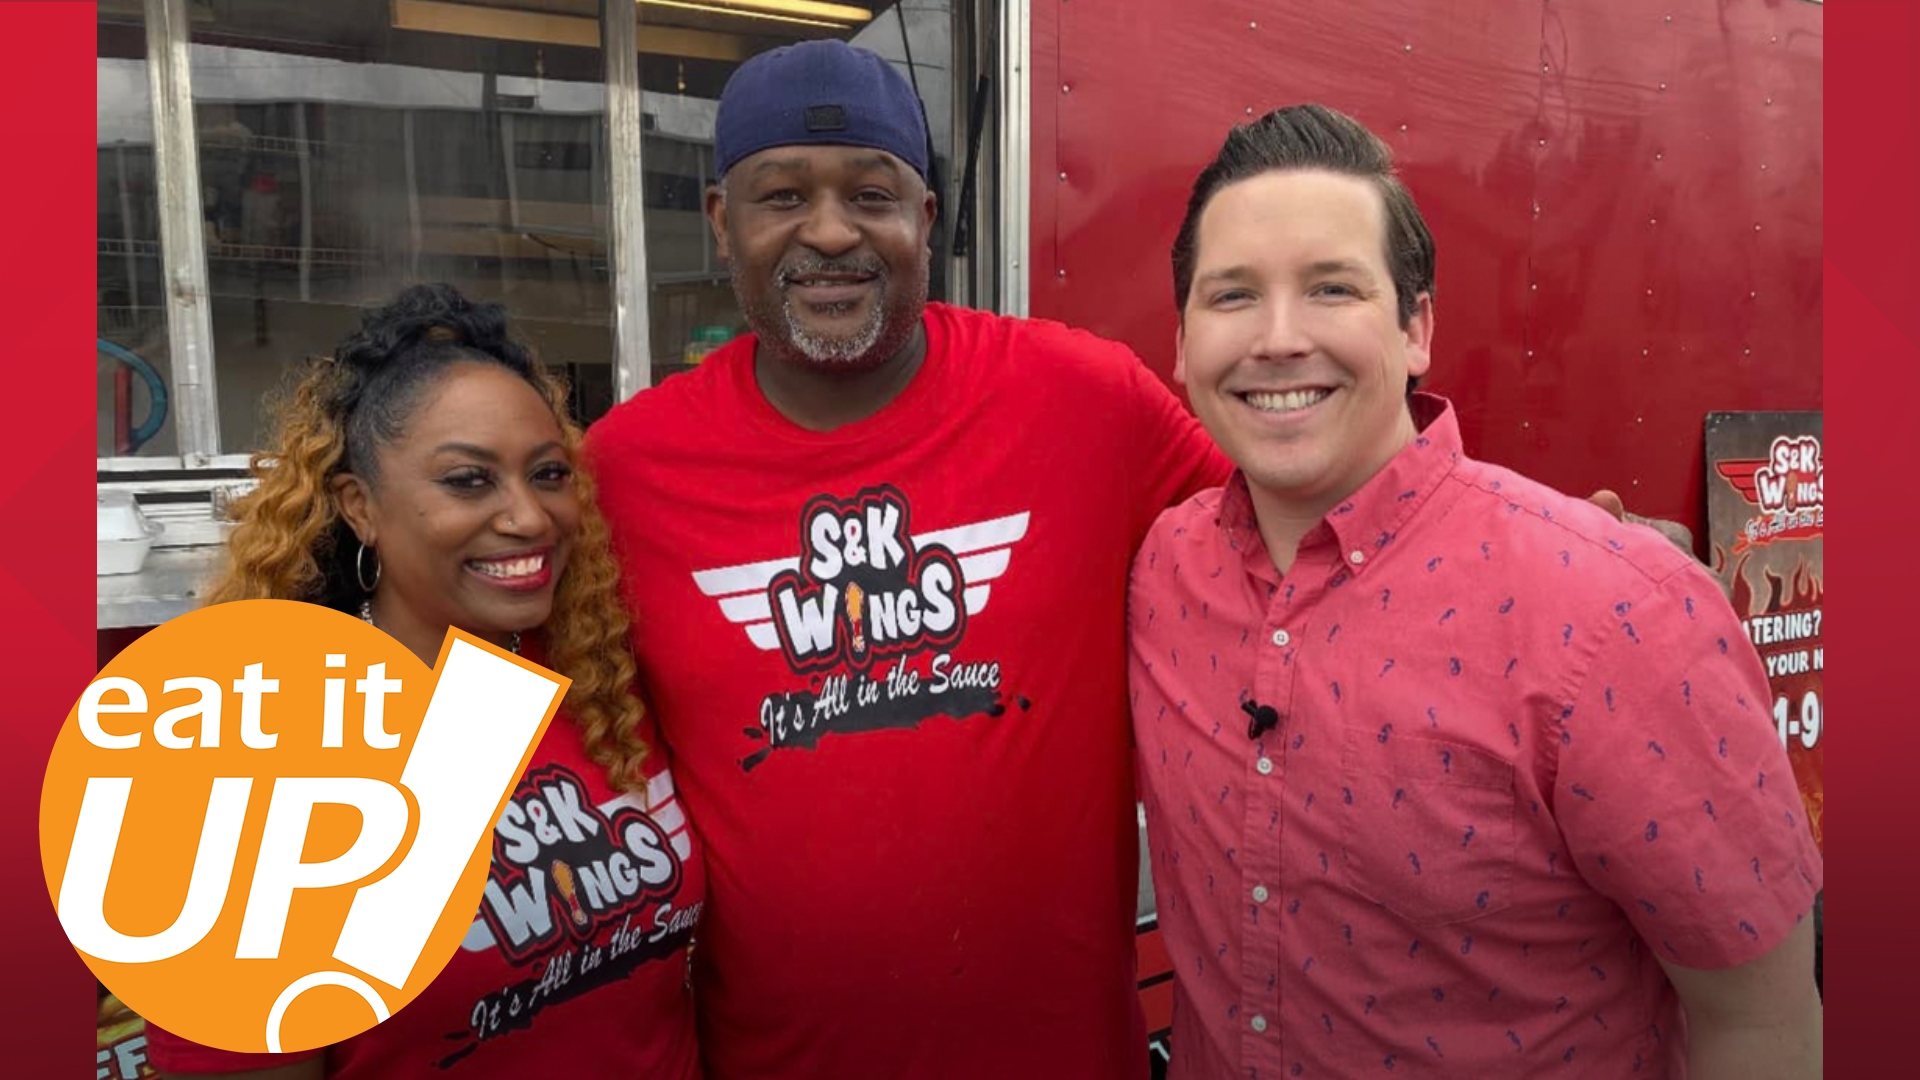 On this week's Eat It Up, Hayden Balgavy visits S & K Wings, a food truck based in North Little Rock that's all about spreading joy and serving some good food.